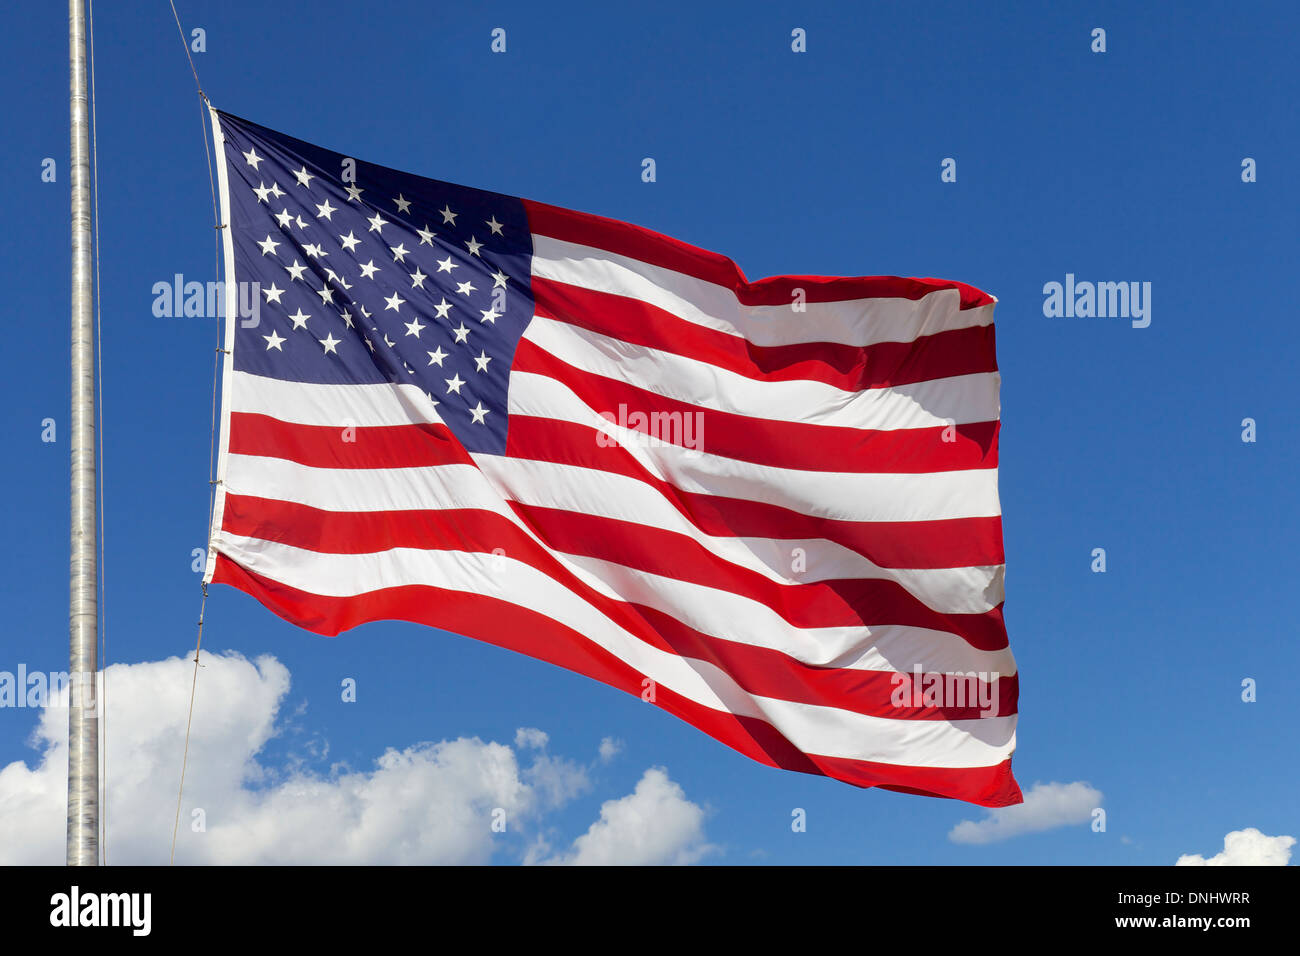 American flag, United States of America Stock Photo